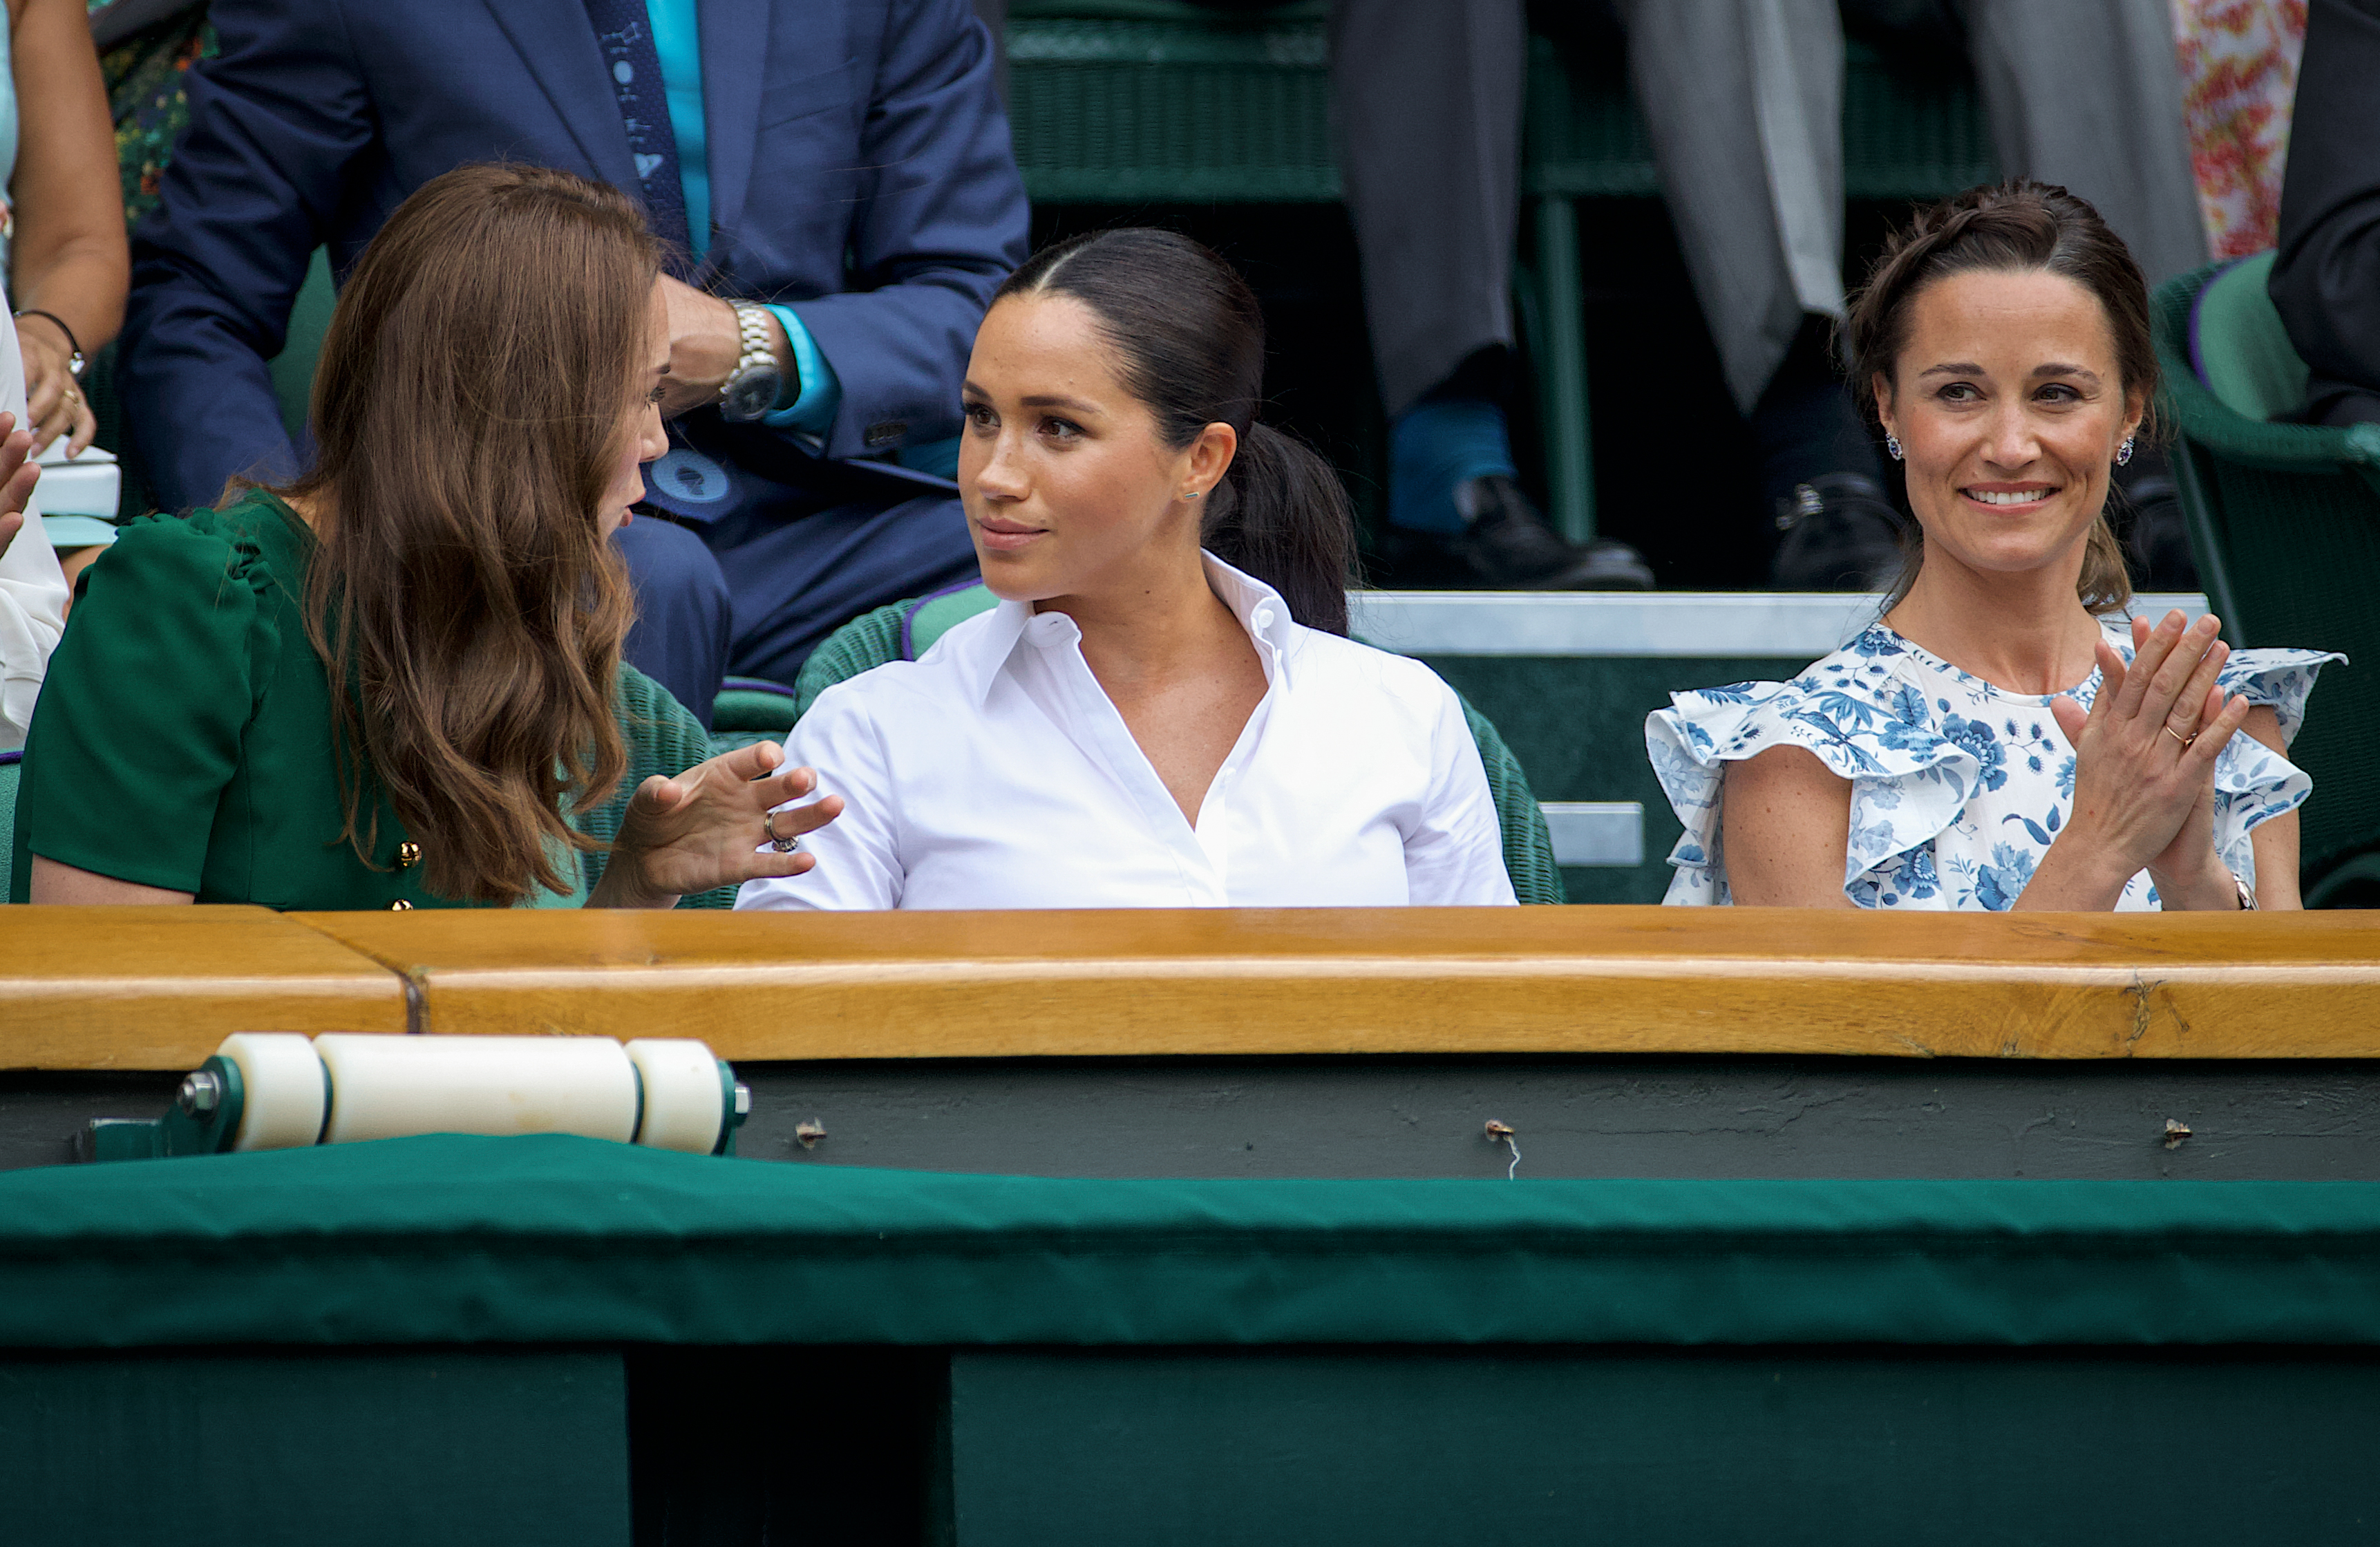 Princess Catherine, Meghan Markle, and Pippa Middleton at Wimbledon 2019 at All England Lawn Tennis and Croquet Club on July 13, 2019 in London, England | Source: Getty Images